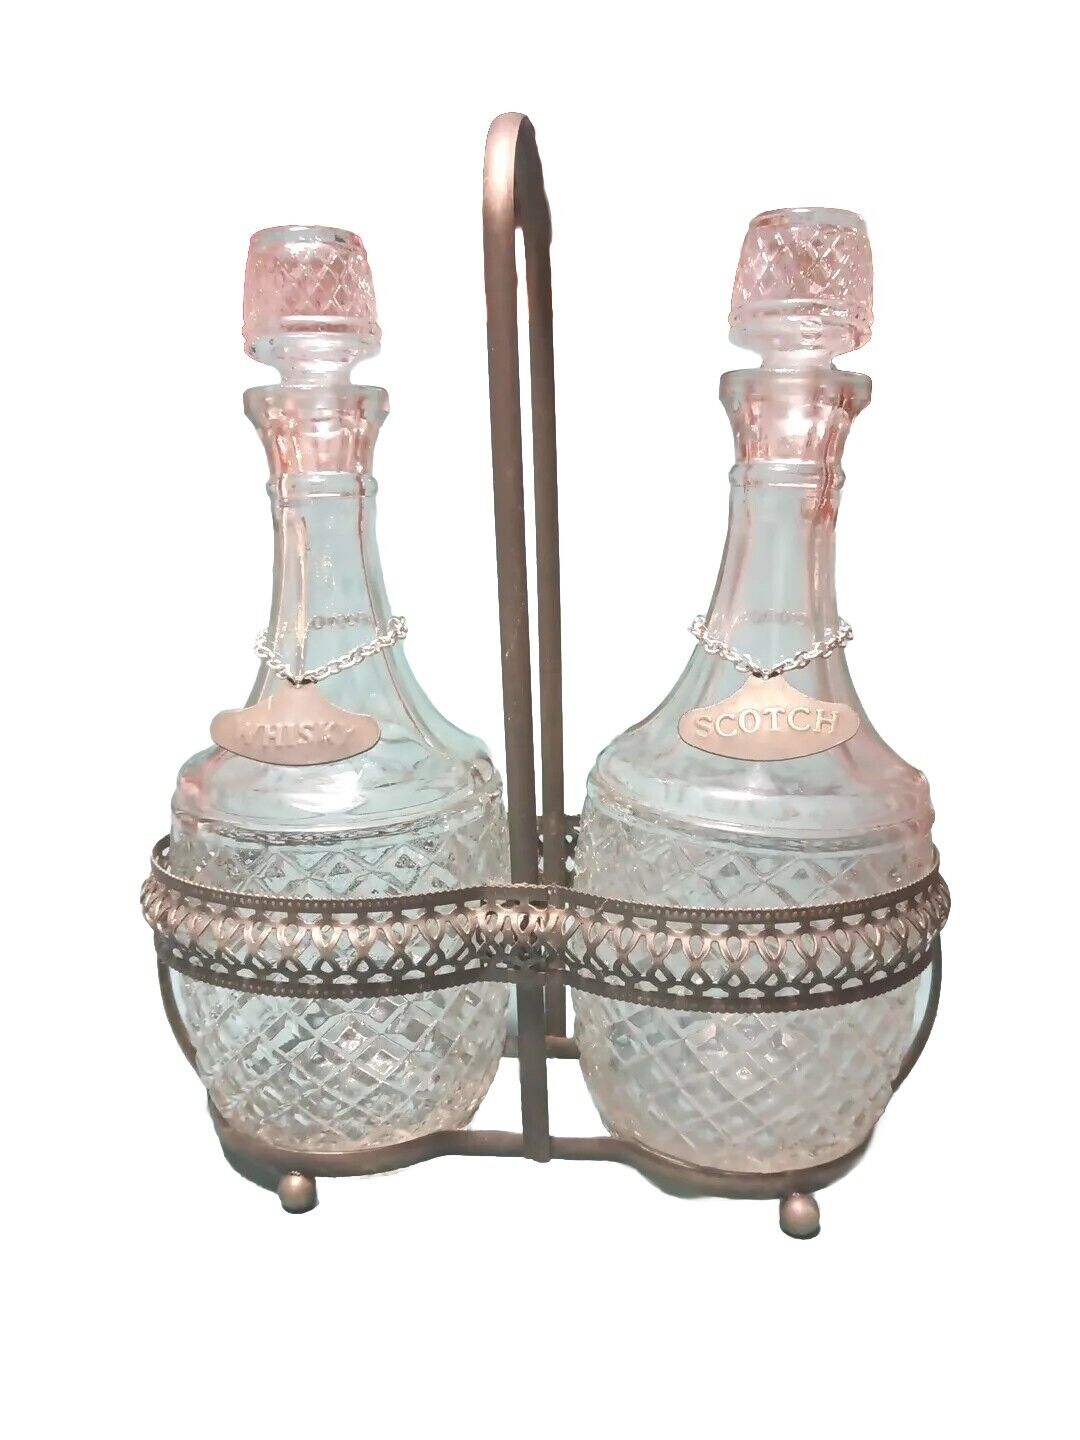 Gales Of Sheffield Vintage Crystal Decanters With Silver Plate Holder